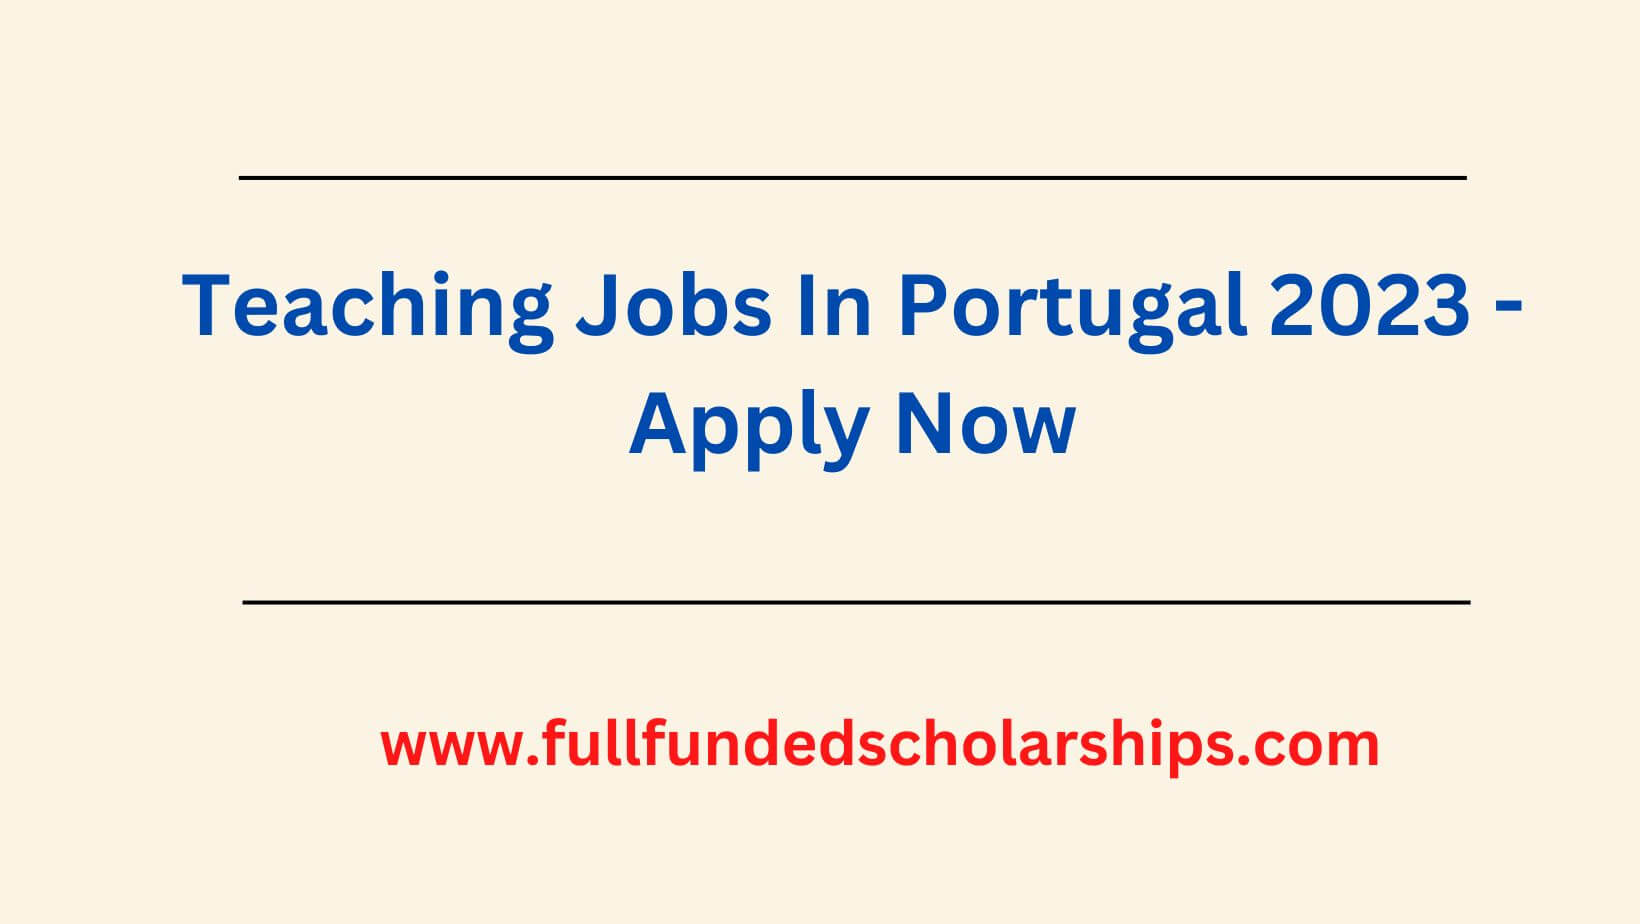 Teaching Jobs In Portugal 2023 - Apply Now